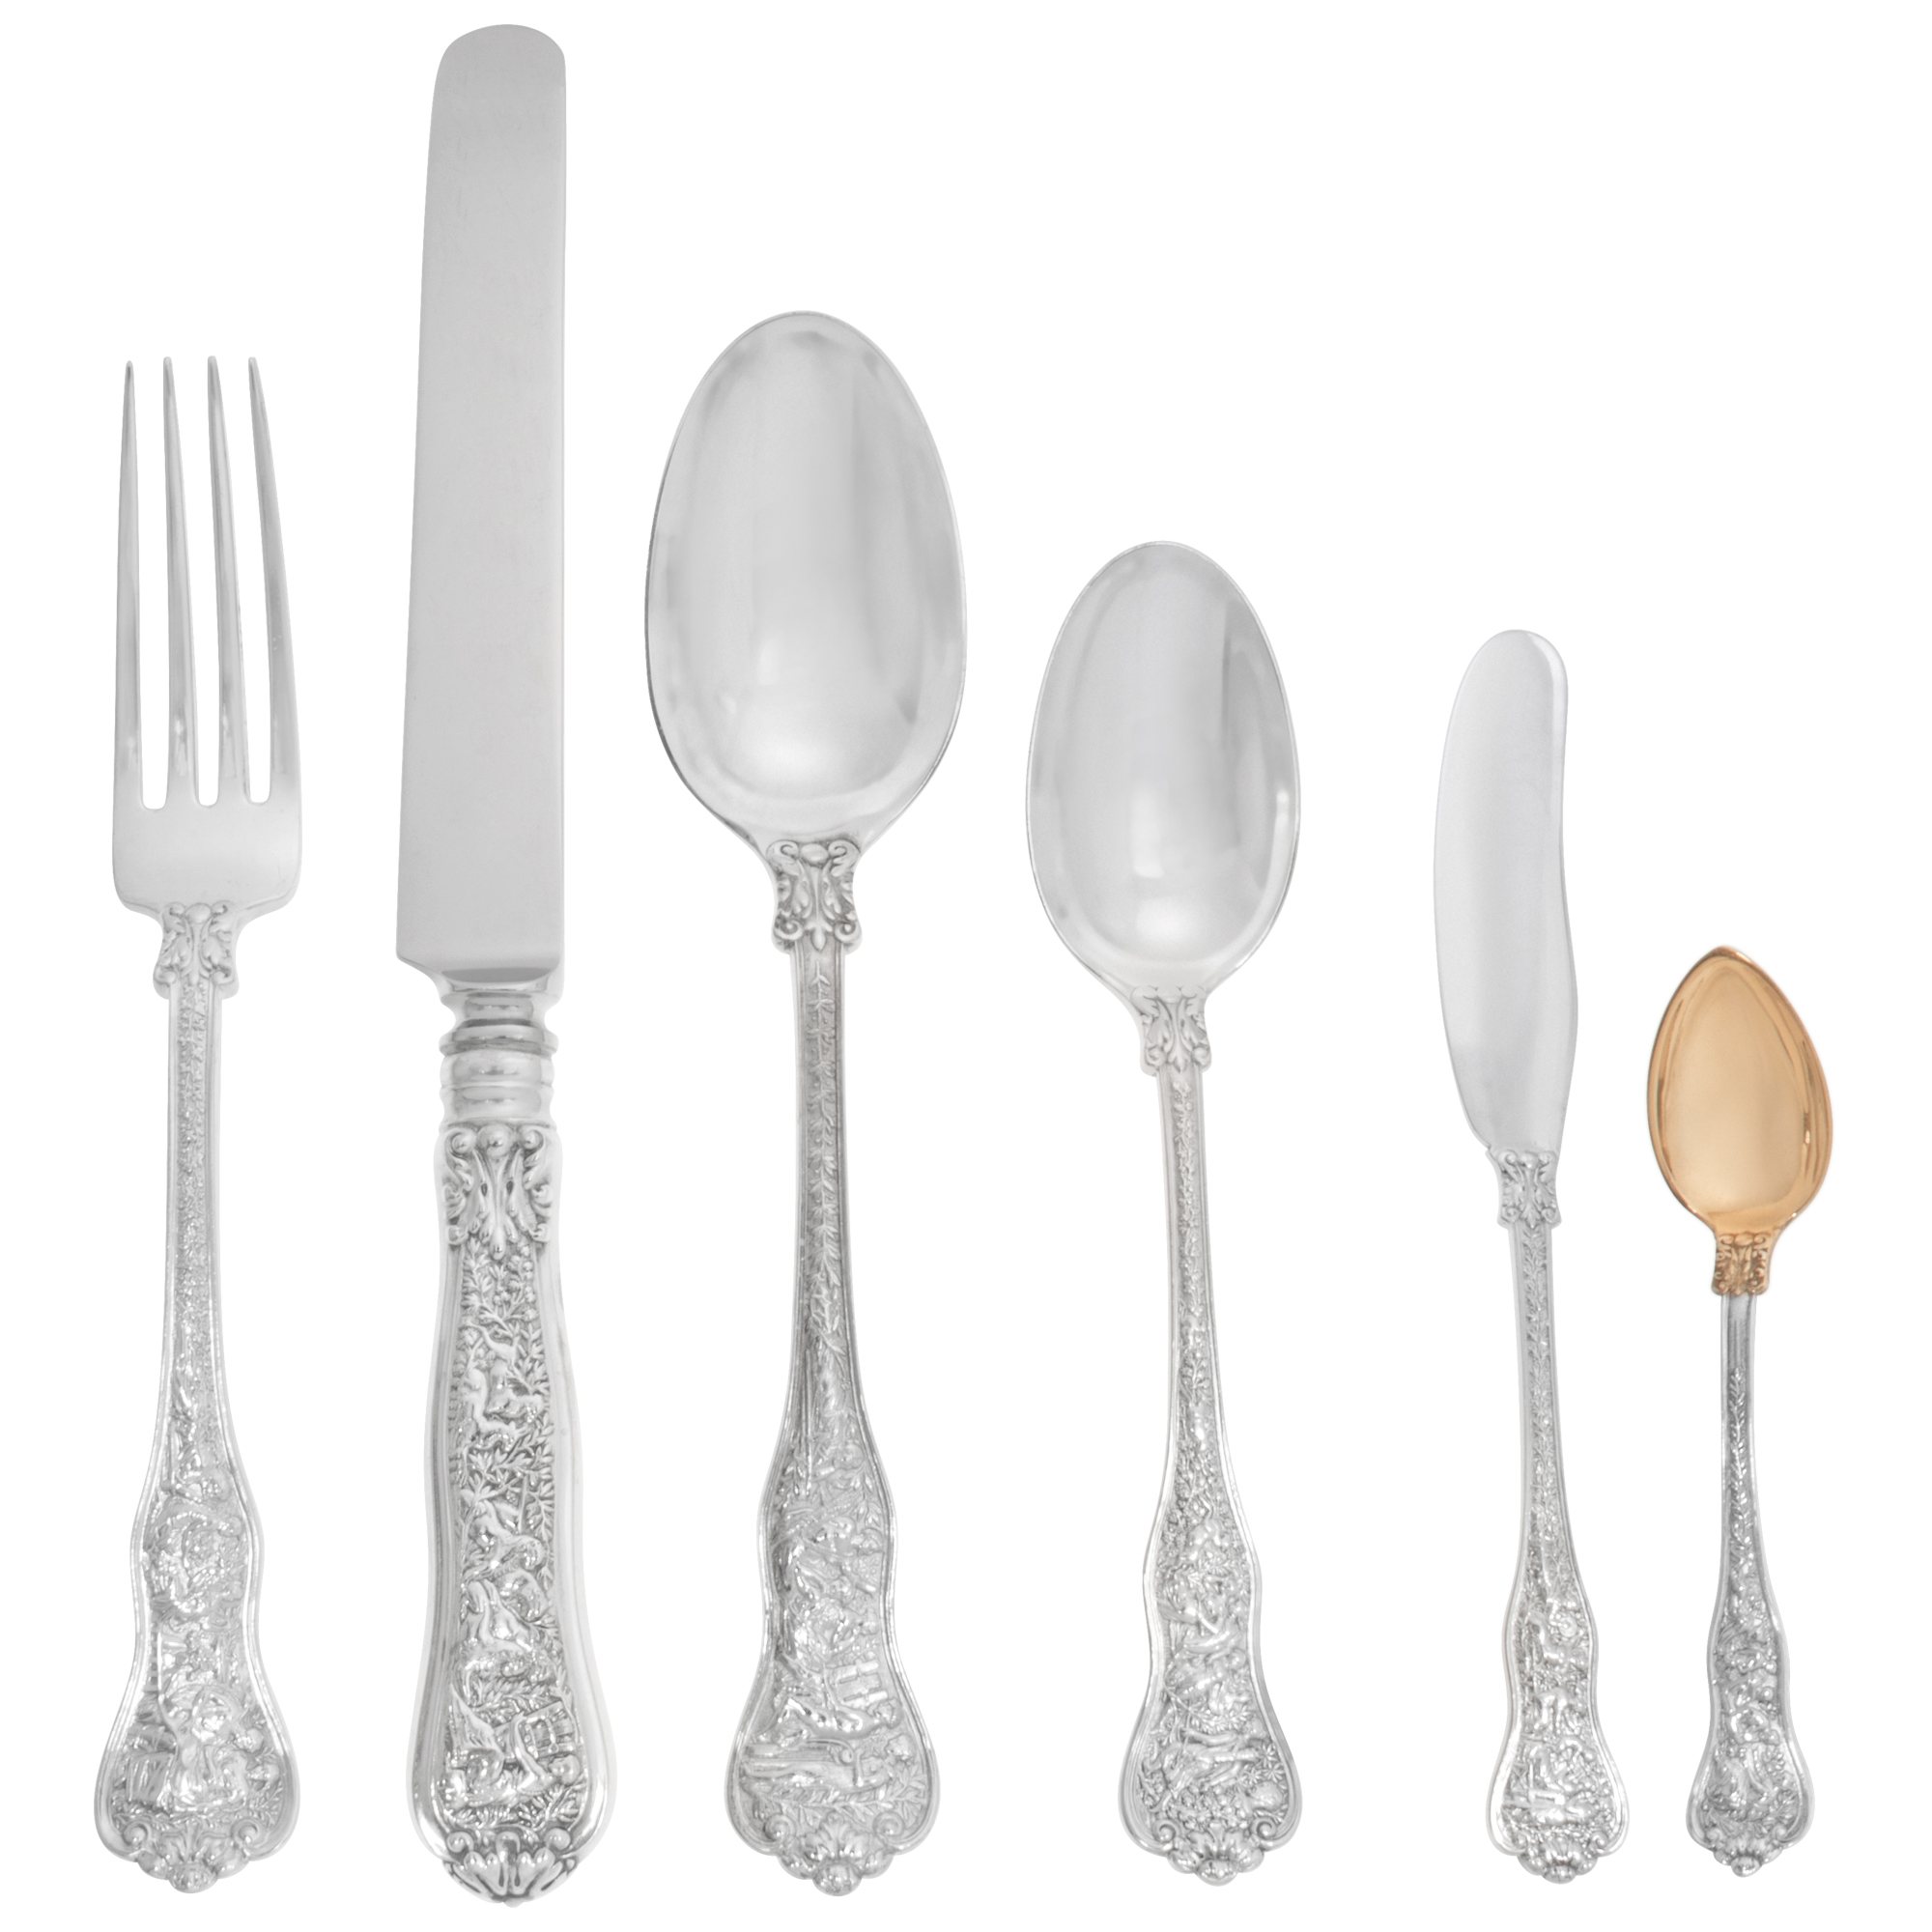 OLYMPIAN, Tiffany & Co, sterling silver flatware, 6 place setting for 10 with extras & 3 serving pieces.Total 79 pieces, Over 3000 grams sterling silver, (over 106 troy ounces. image 1